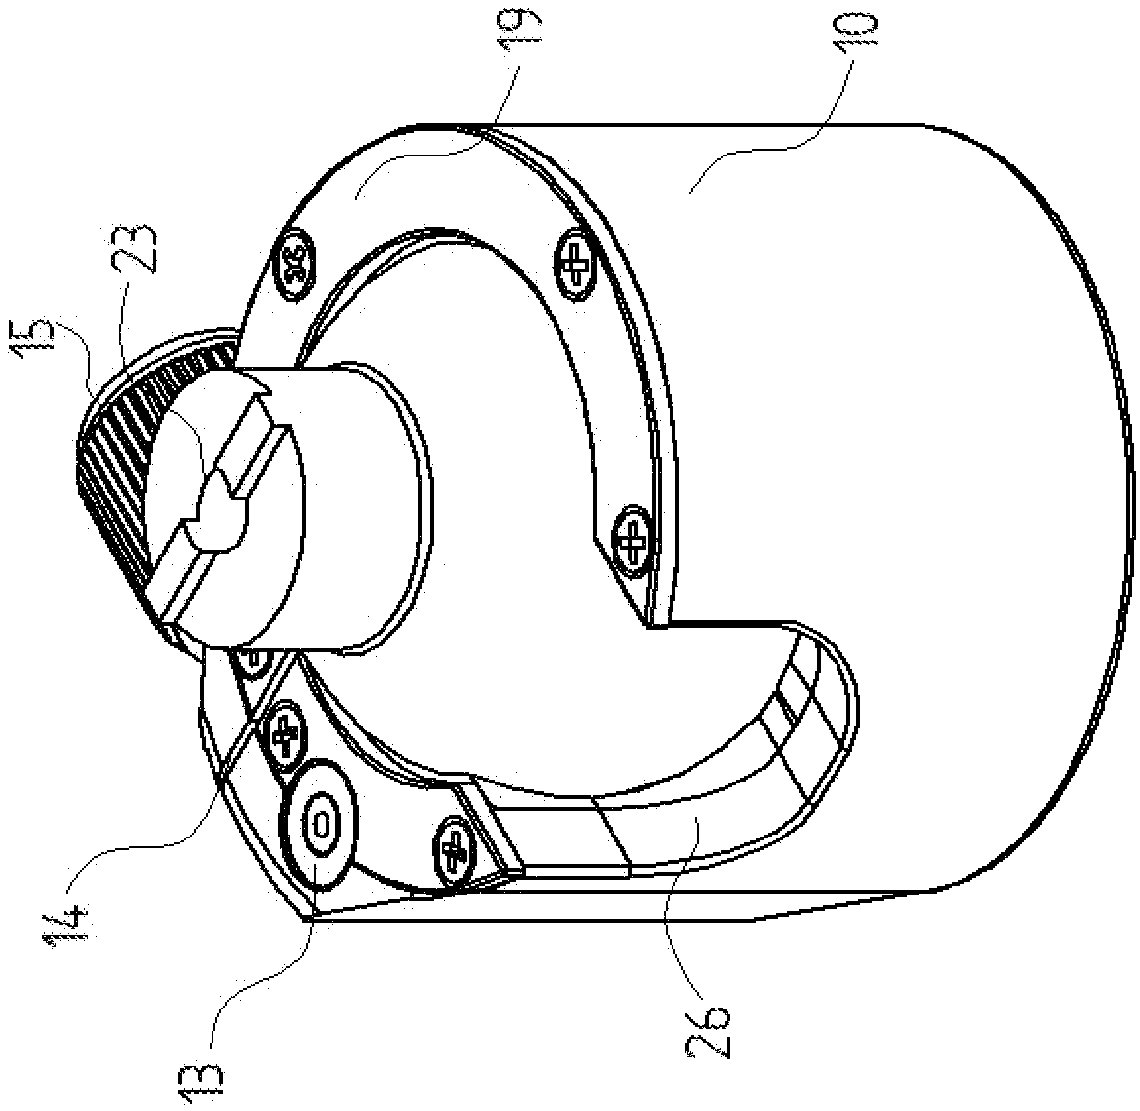 Spherical head assembly for attaching optical and/or electronic device to stander